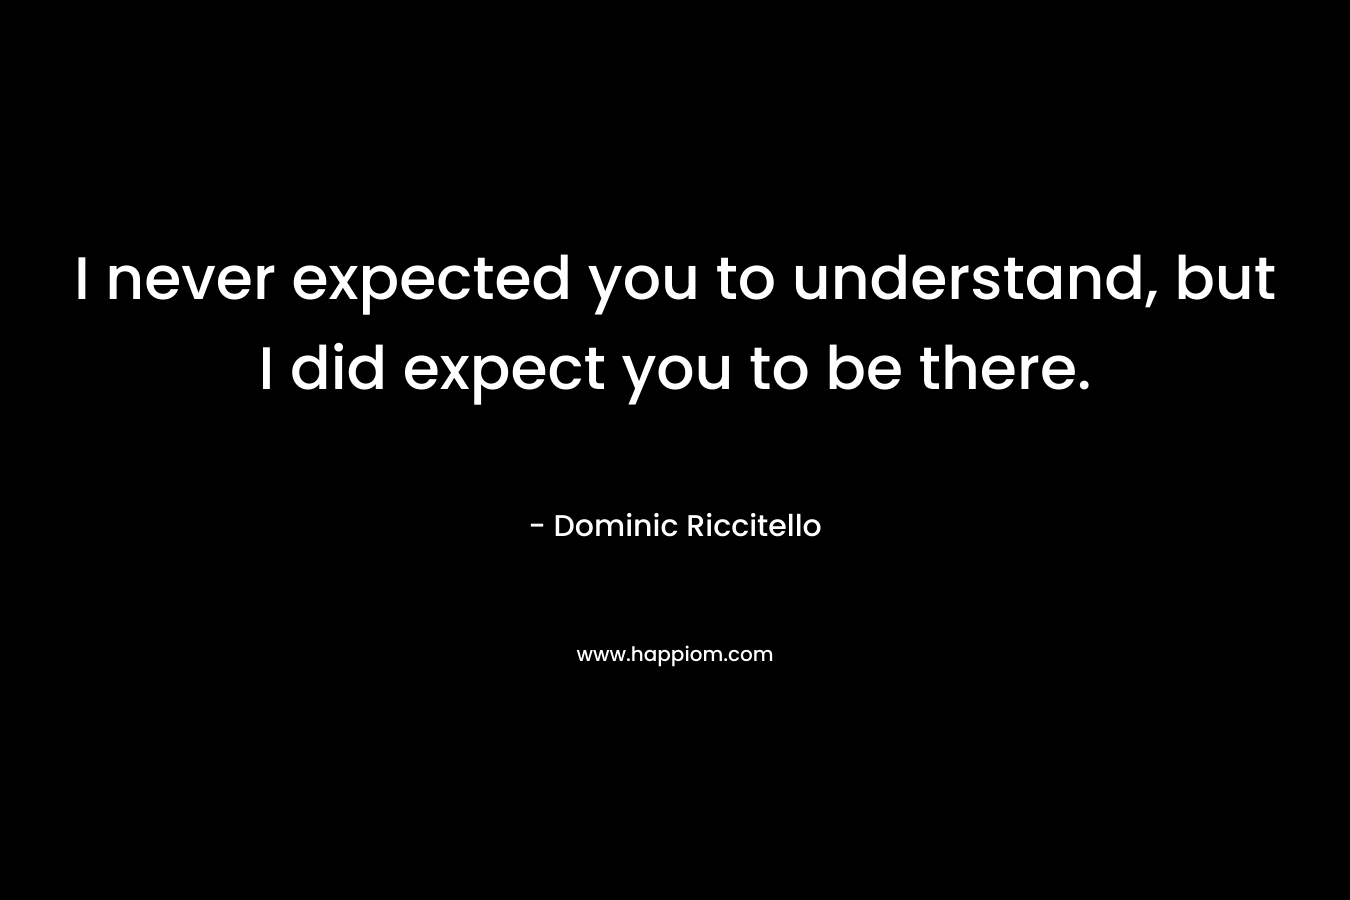 I never expected you to understand, but I did expect you to be there.